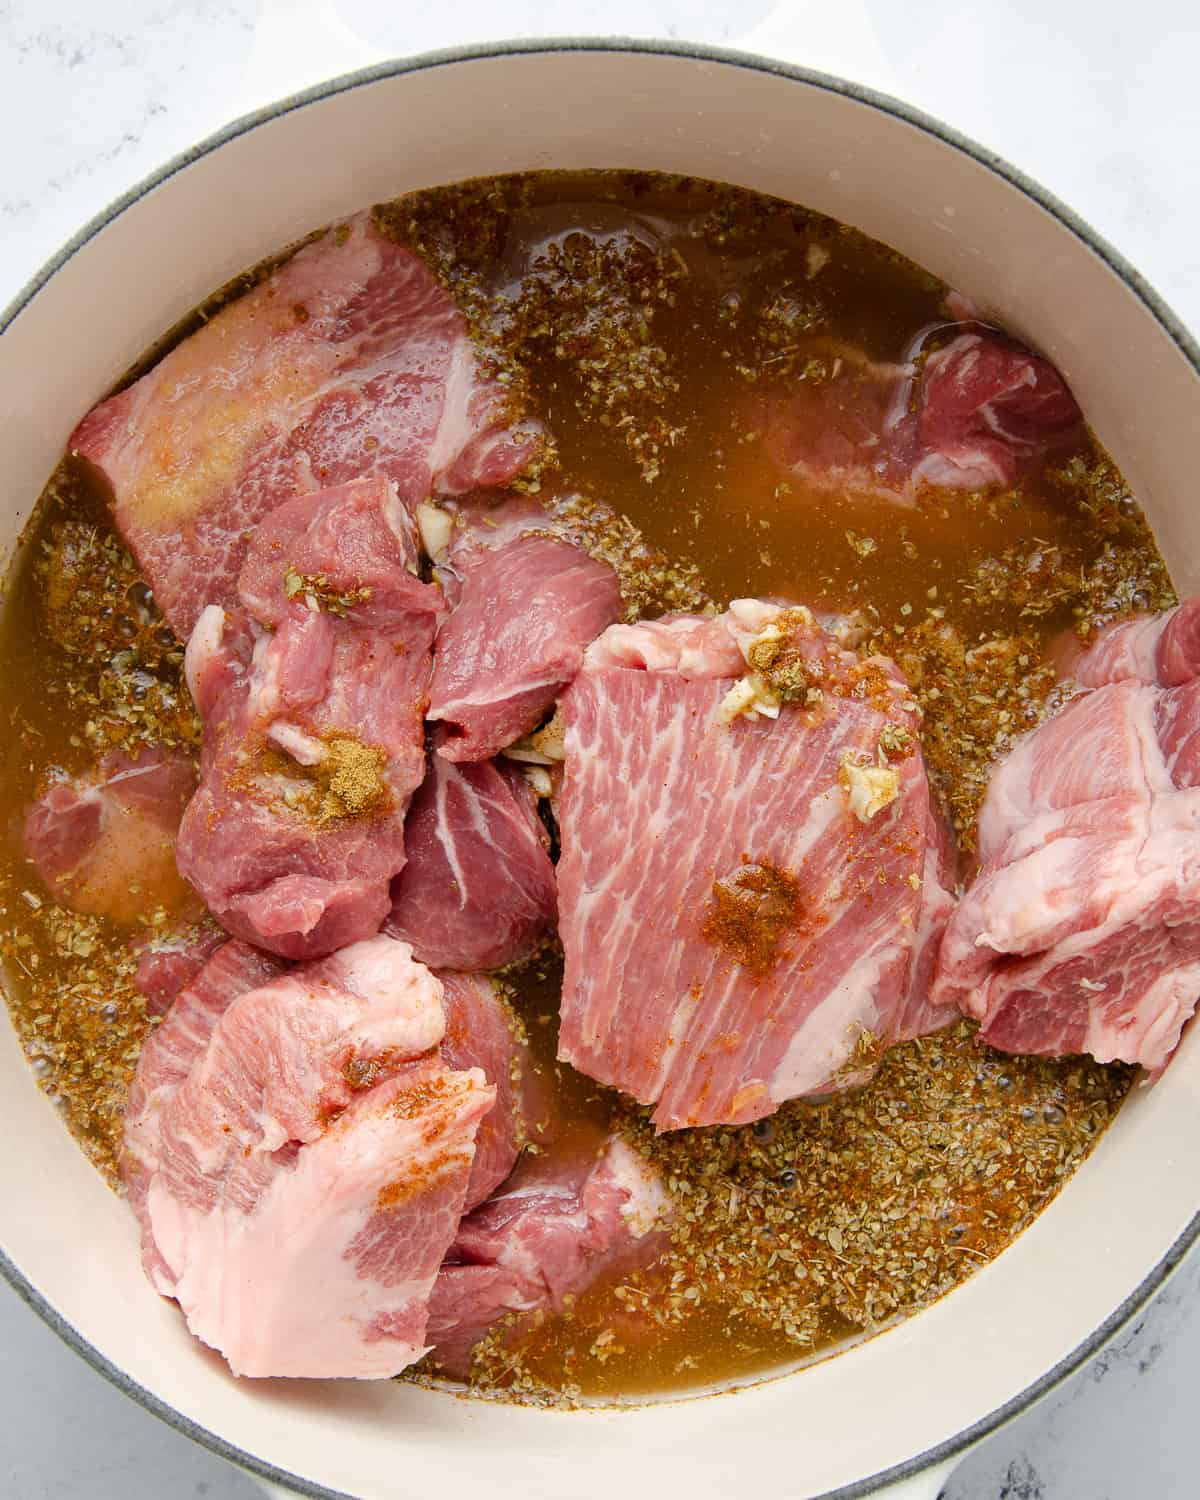 Large chunks of boneless pork shoulder in a dutch oven filled with spices and broth.